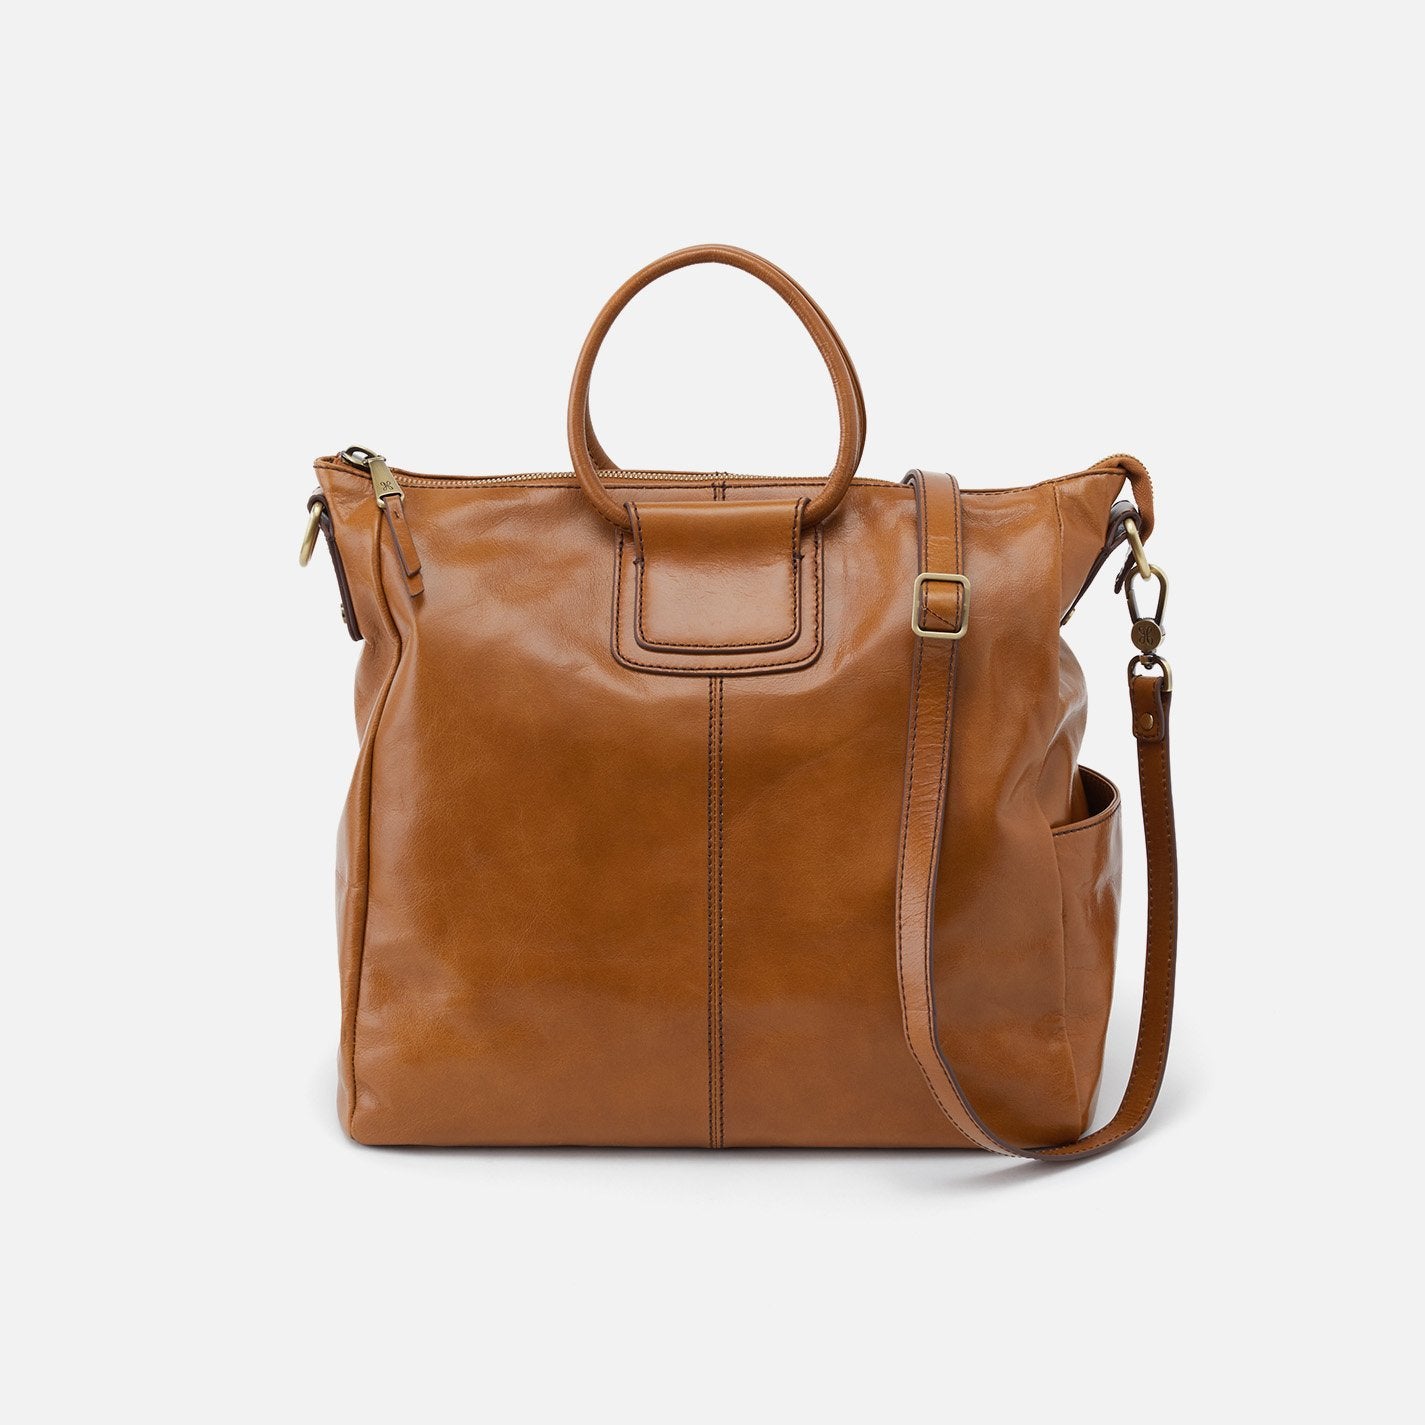 SHEILA Large Satchel by HOBO - The Street Boutique 